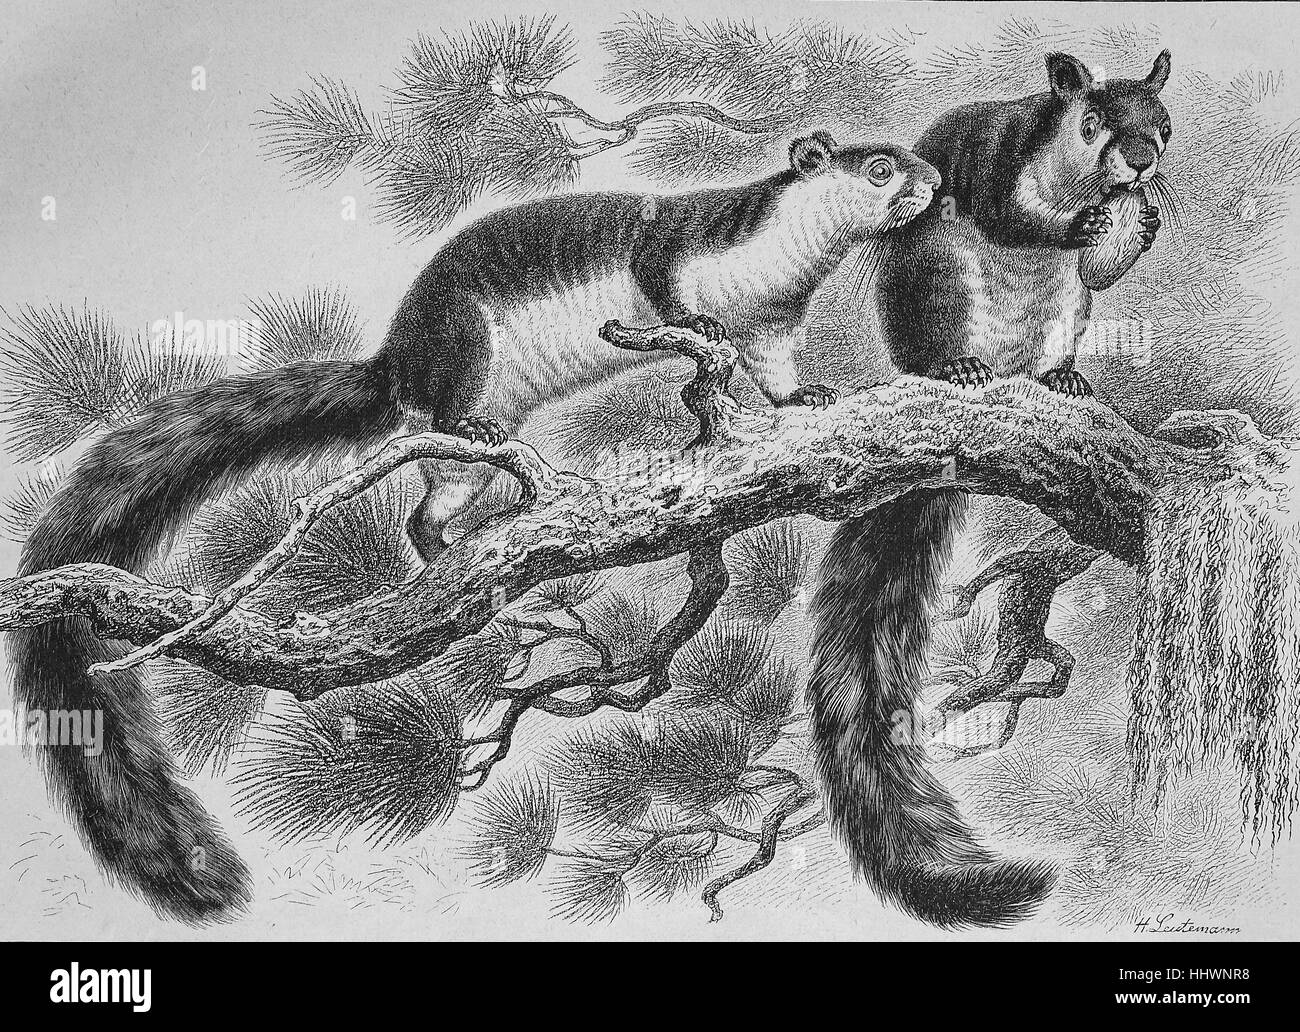 Horse Siberian Squirrel in the Zoological Garden at Dresden, Germany, drawn by H. Leutemann, historical image or illustration, published 1890, digital improved Stock Photo